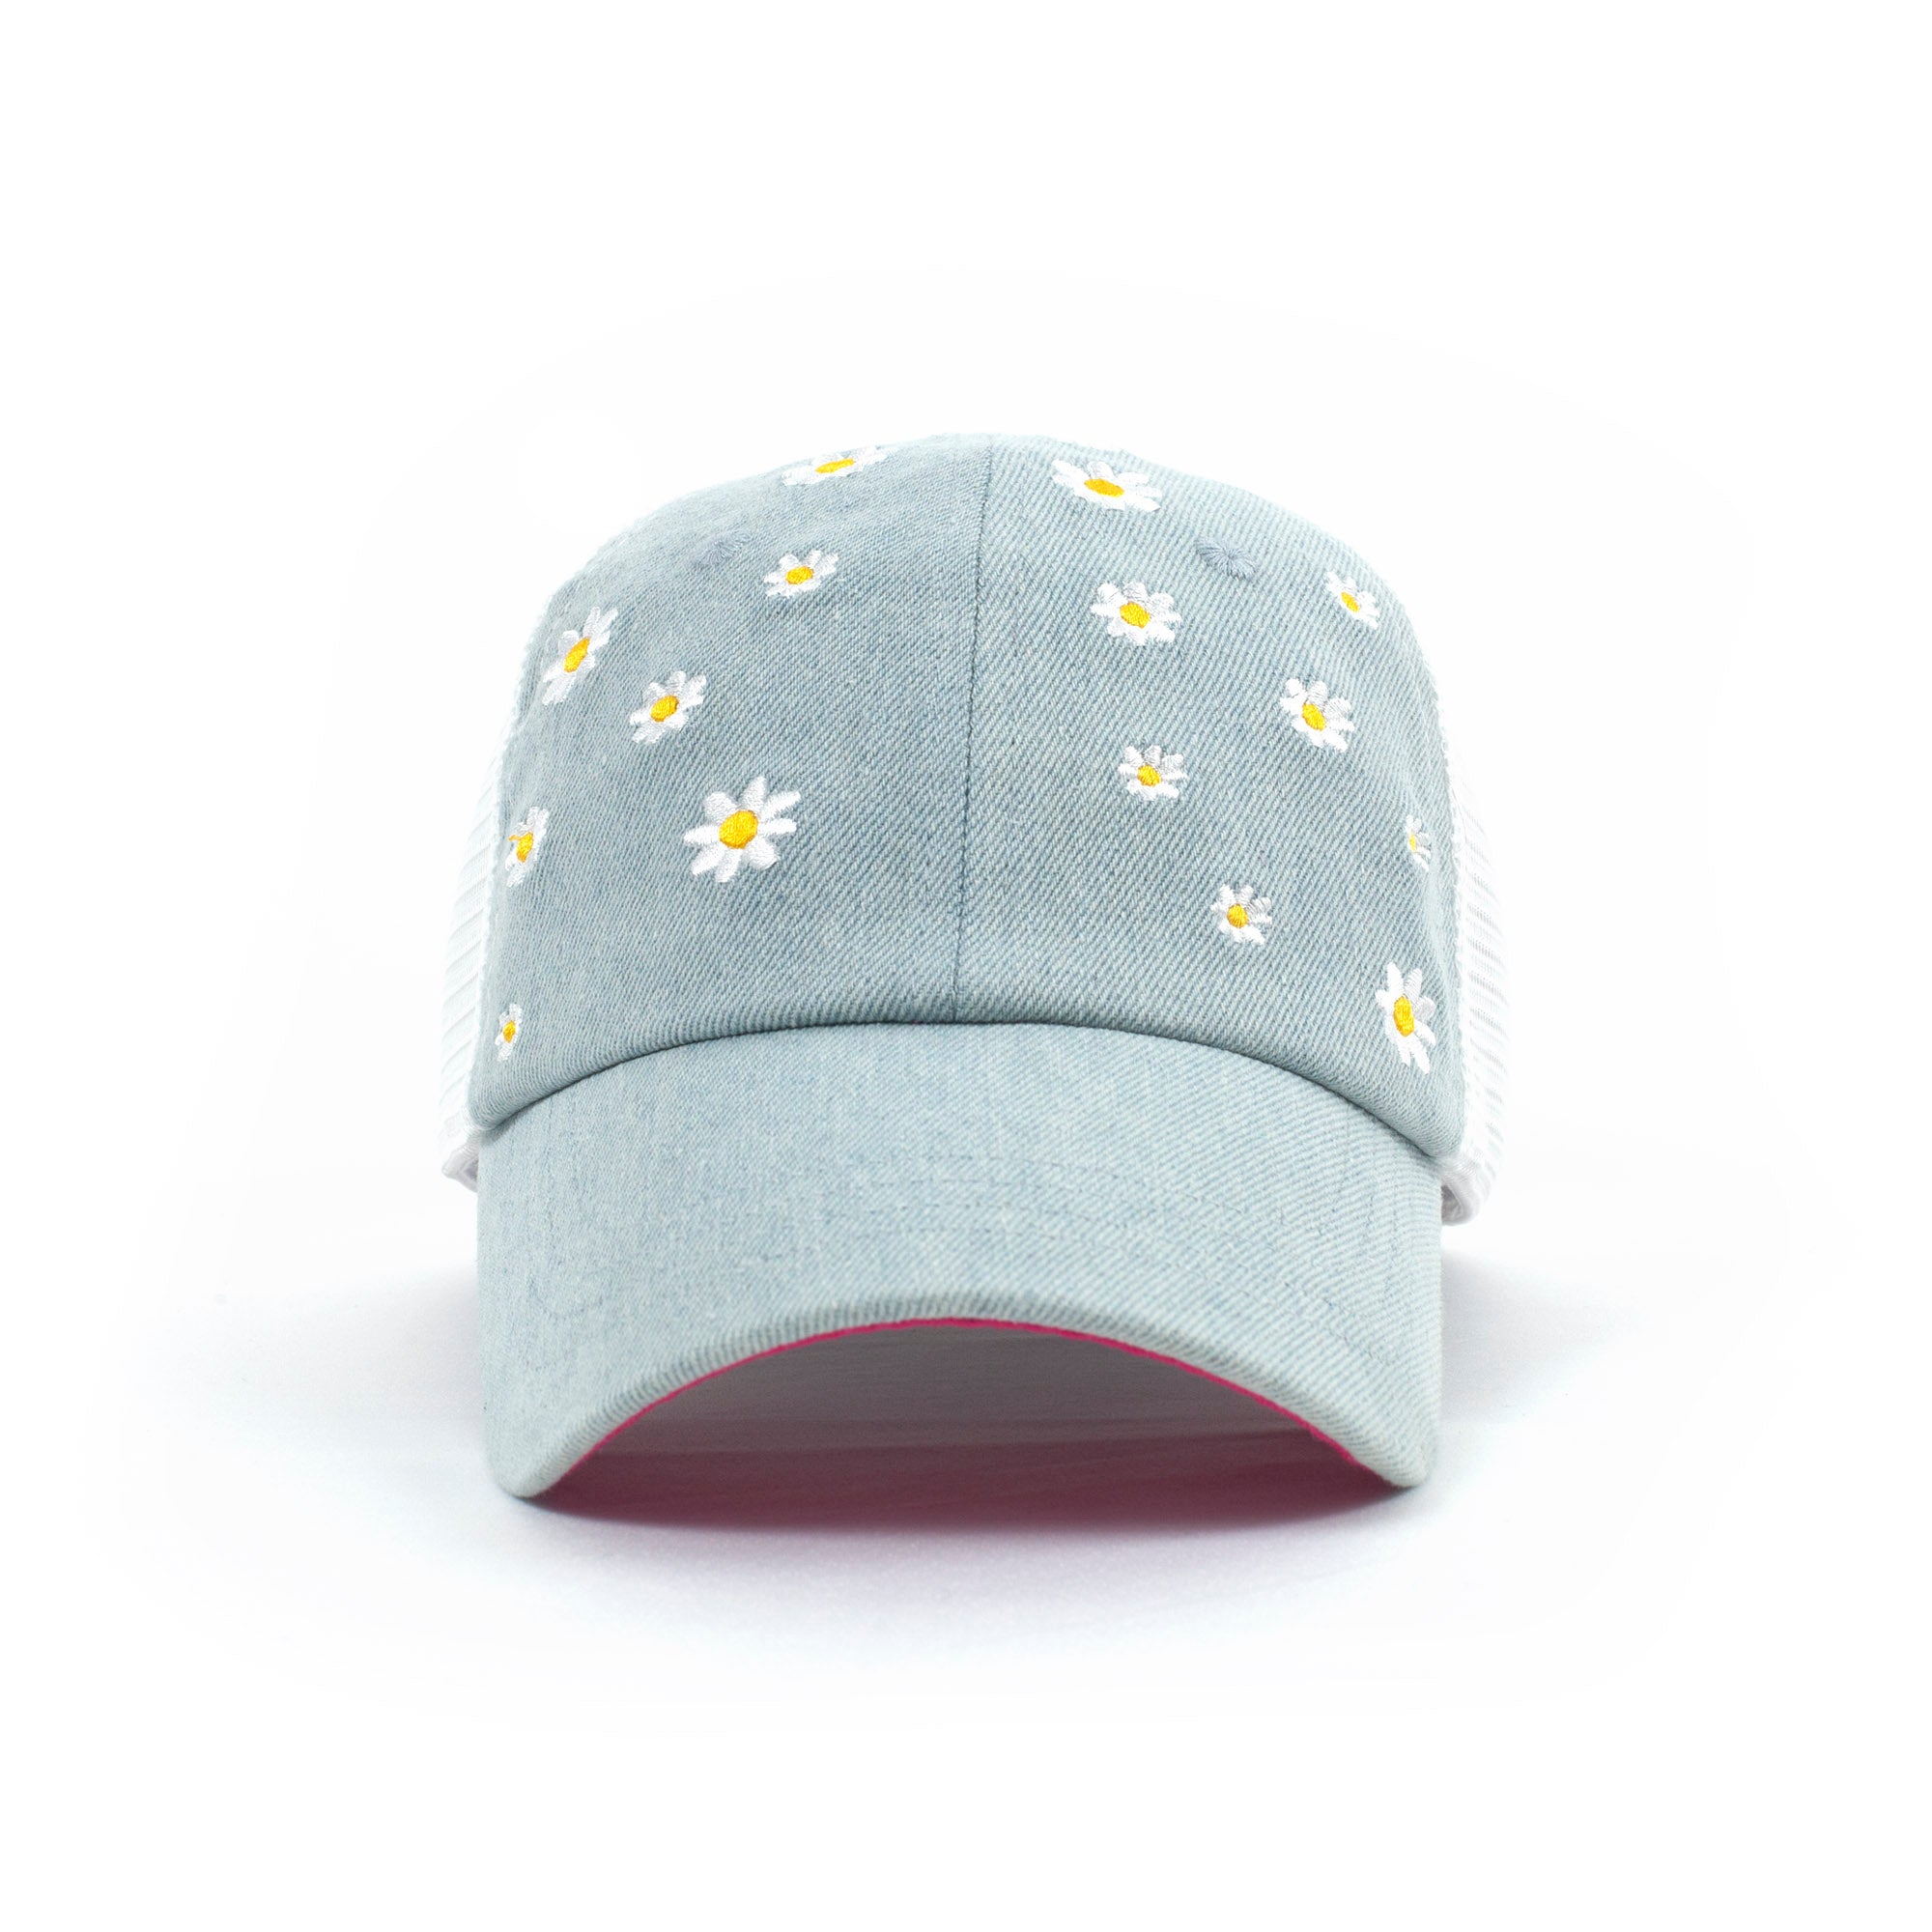 Women’s Hats, Women’s Trucker Hats, Trucker Hats, Hats, Adjustable Hats, Everyday Use, Comfortable, Daisy’s, Pattern